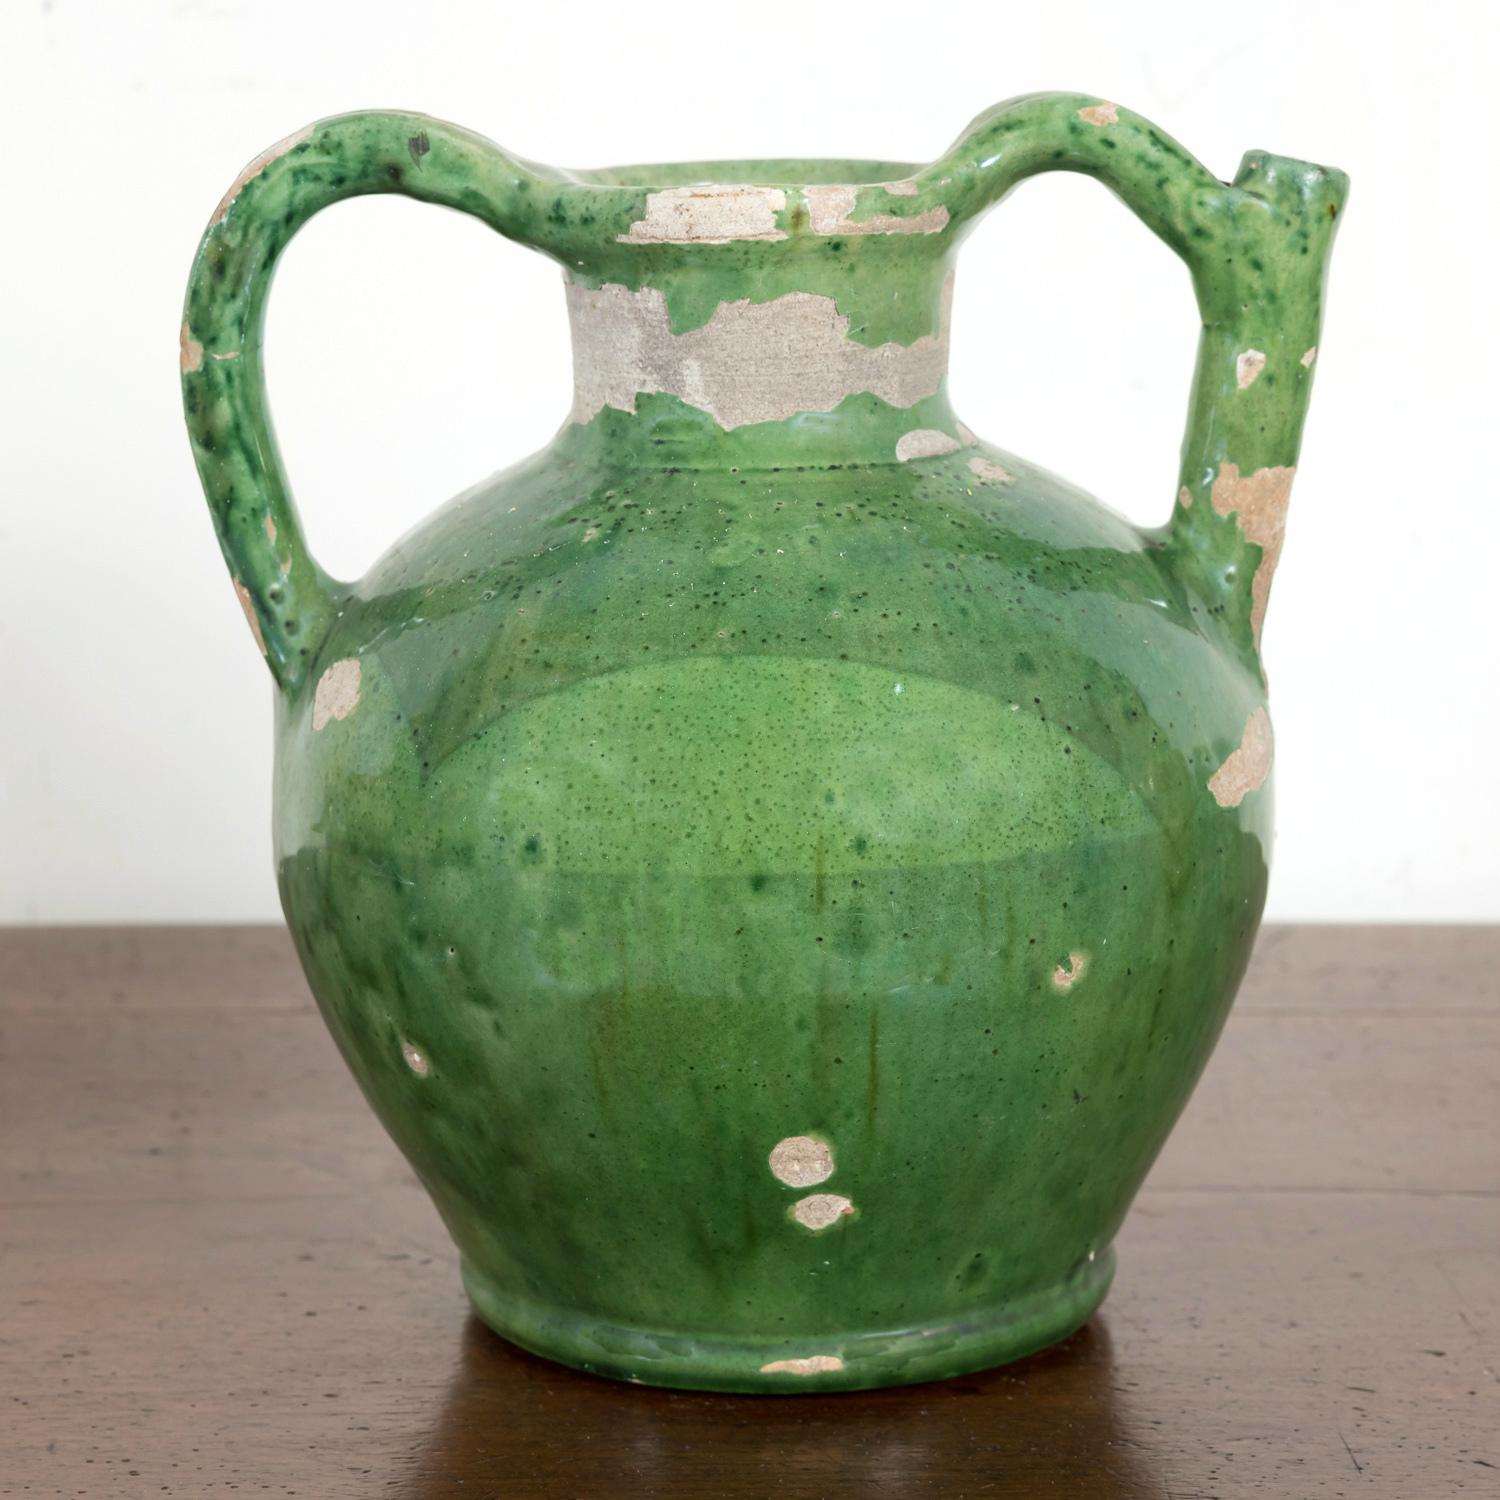 Glazed Mid-19th Century Antique French Cruche Orjol or Water Jug with Rare Green Glaze 